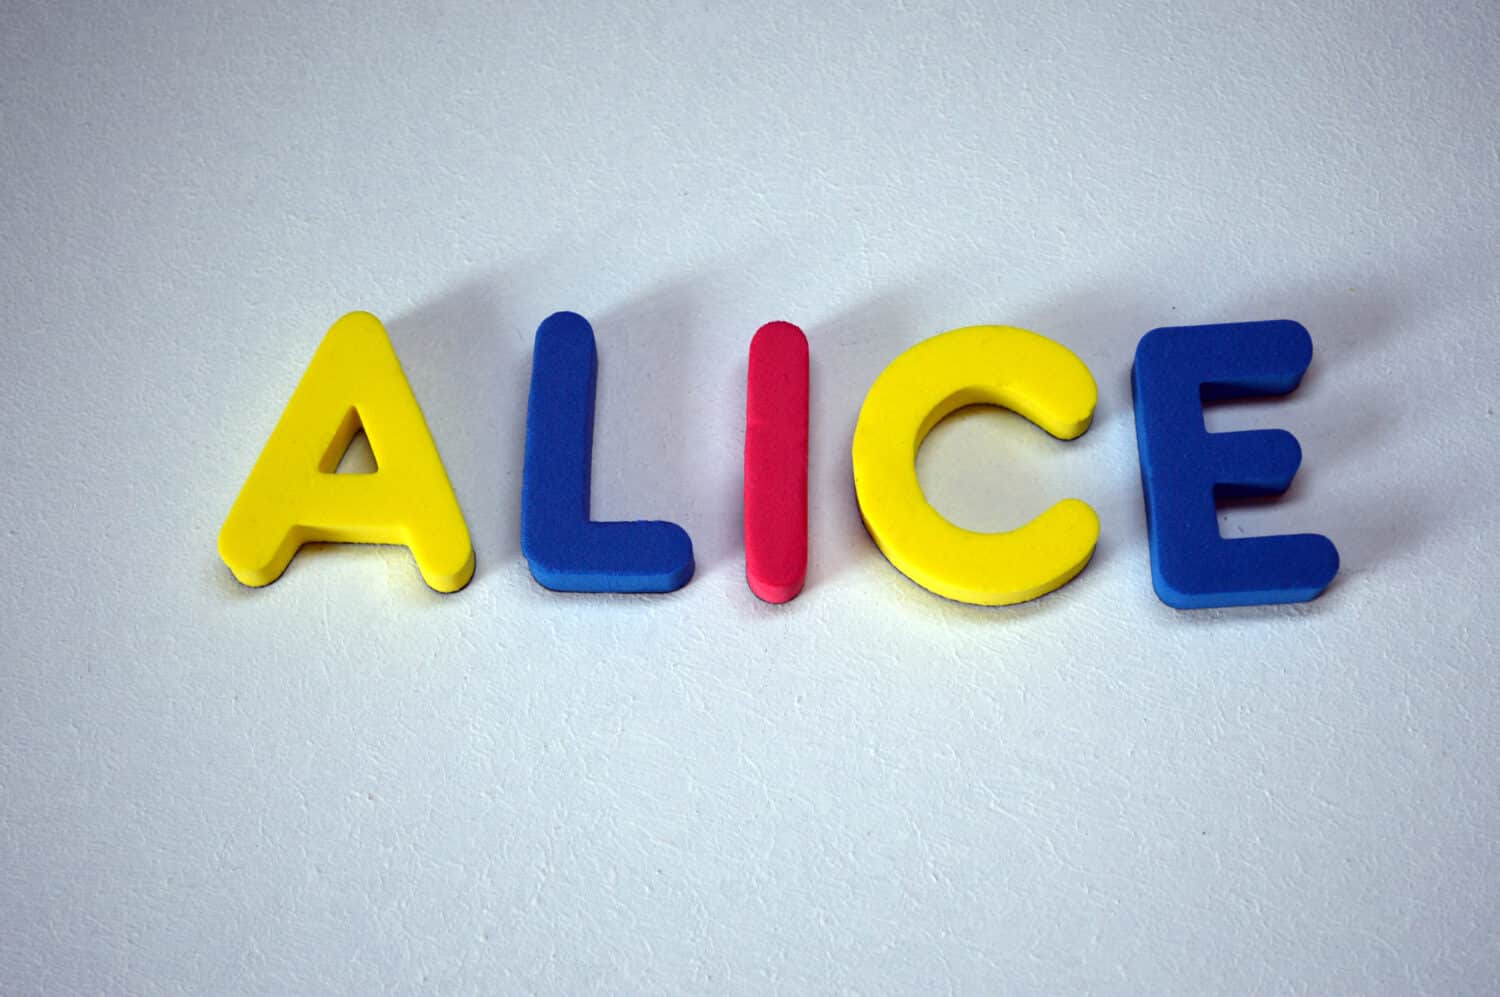 Alice - popular girls name from colorful letters on white background. Alice common female name.